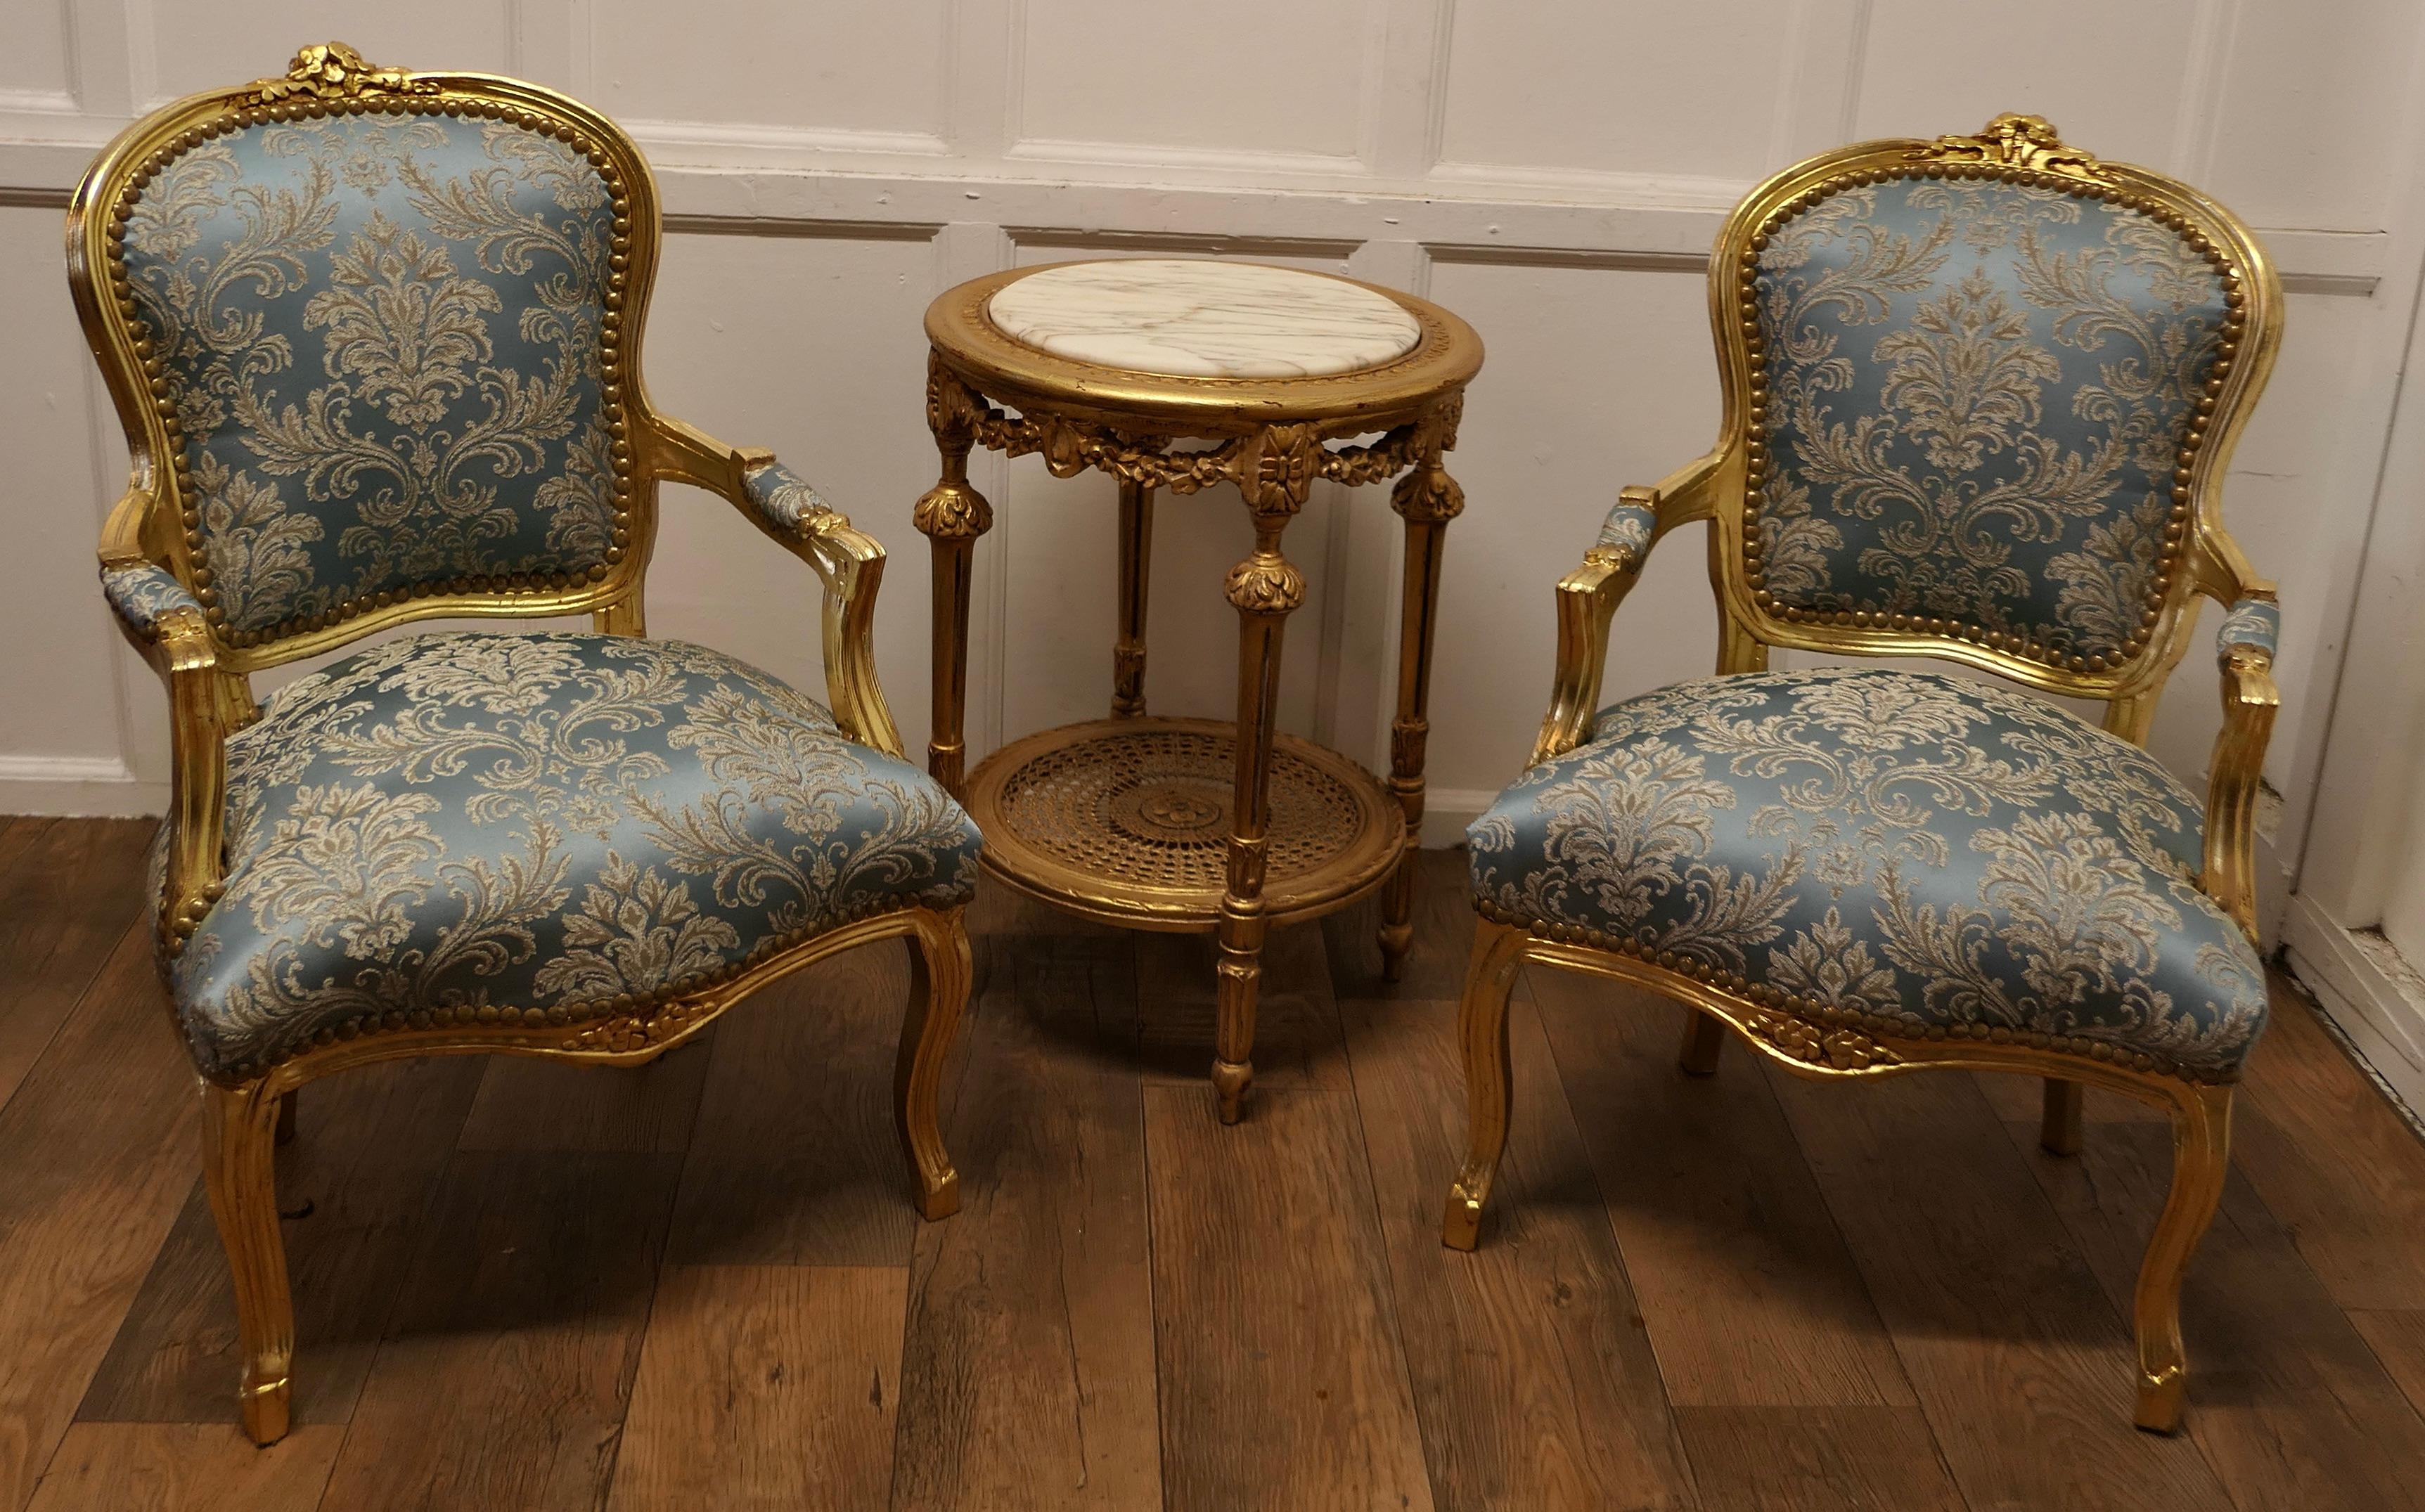 A Superb Pair of French 19th Century Gilt Salon Chairs

These Elegant Chairs have been re finished and upholstered in pale blue Silk Damask, they have a serpentine shaped front and carved detail to the show wood 
A beautiful pair newly brought from